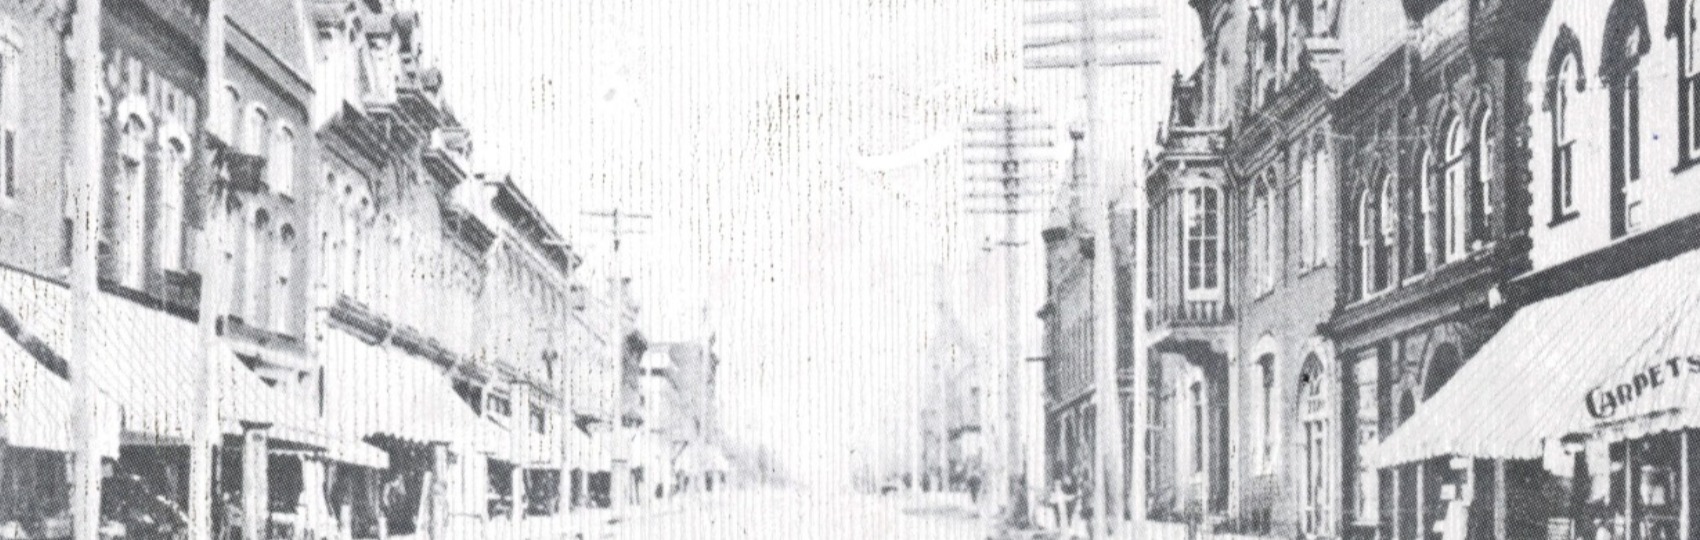 Undated Photo of Downtown Wingham Streetscape